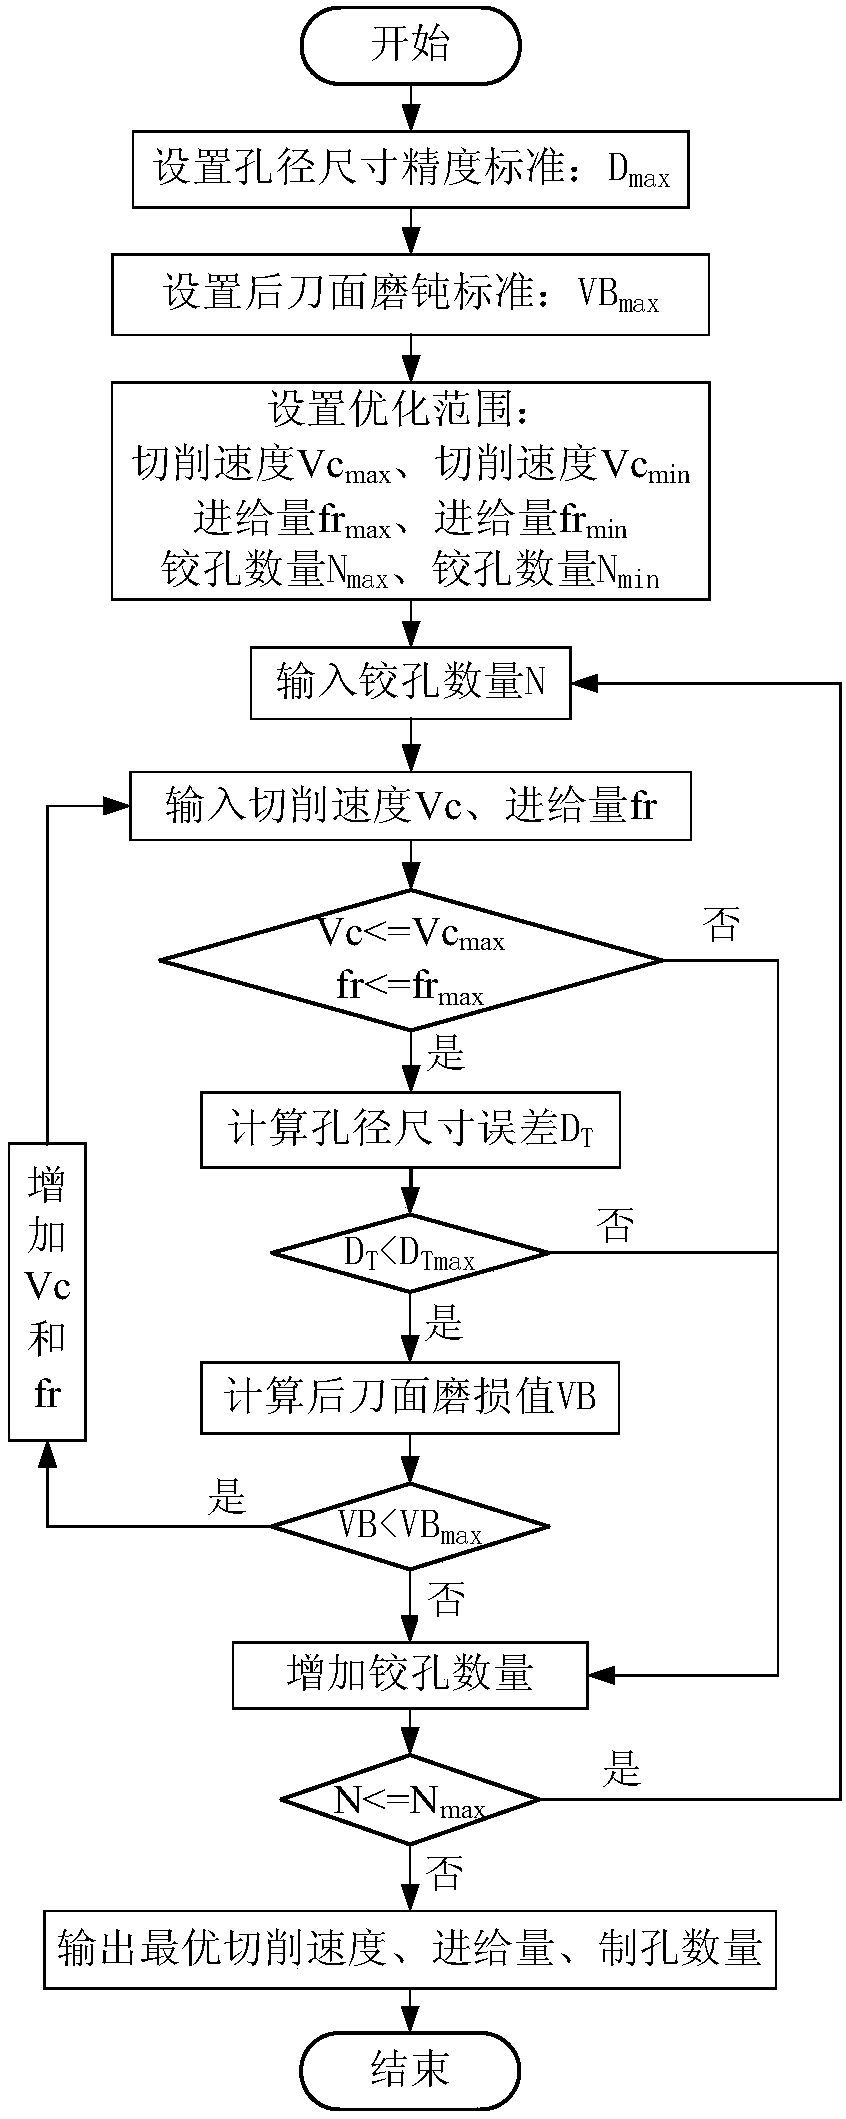 Reaming method of cfrp and titanium alloy laminated structure